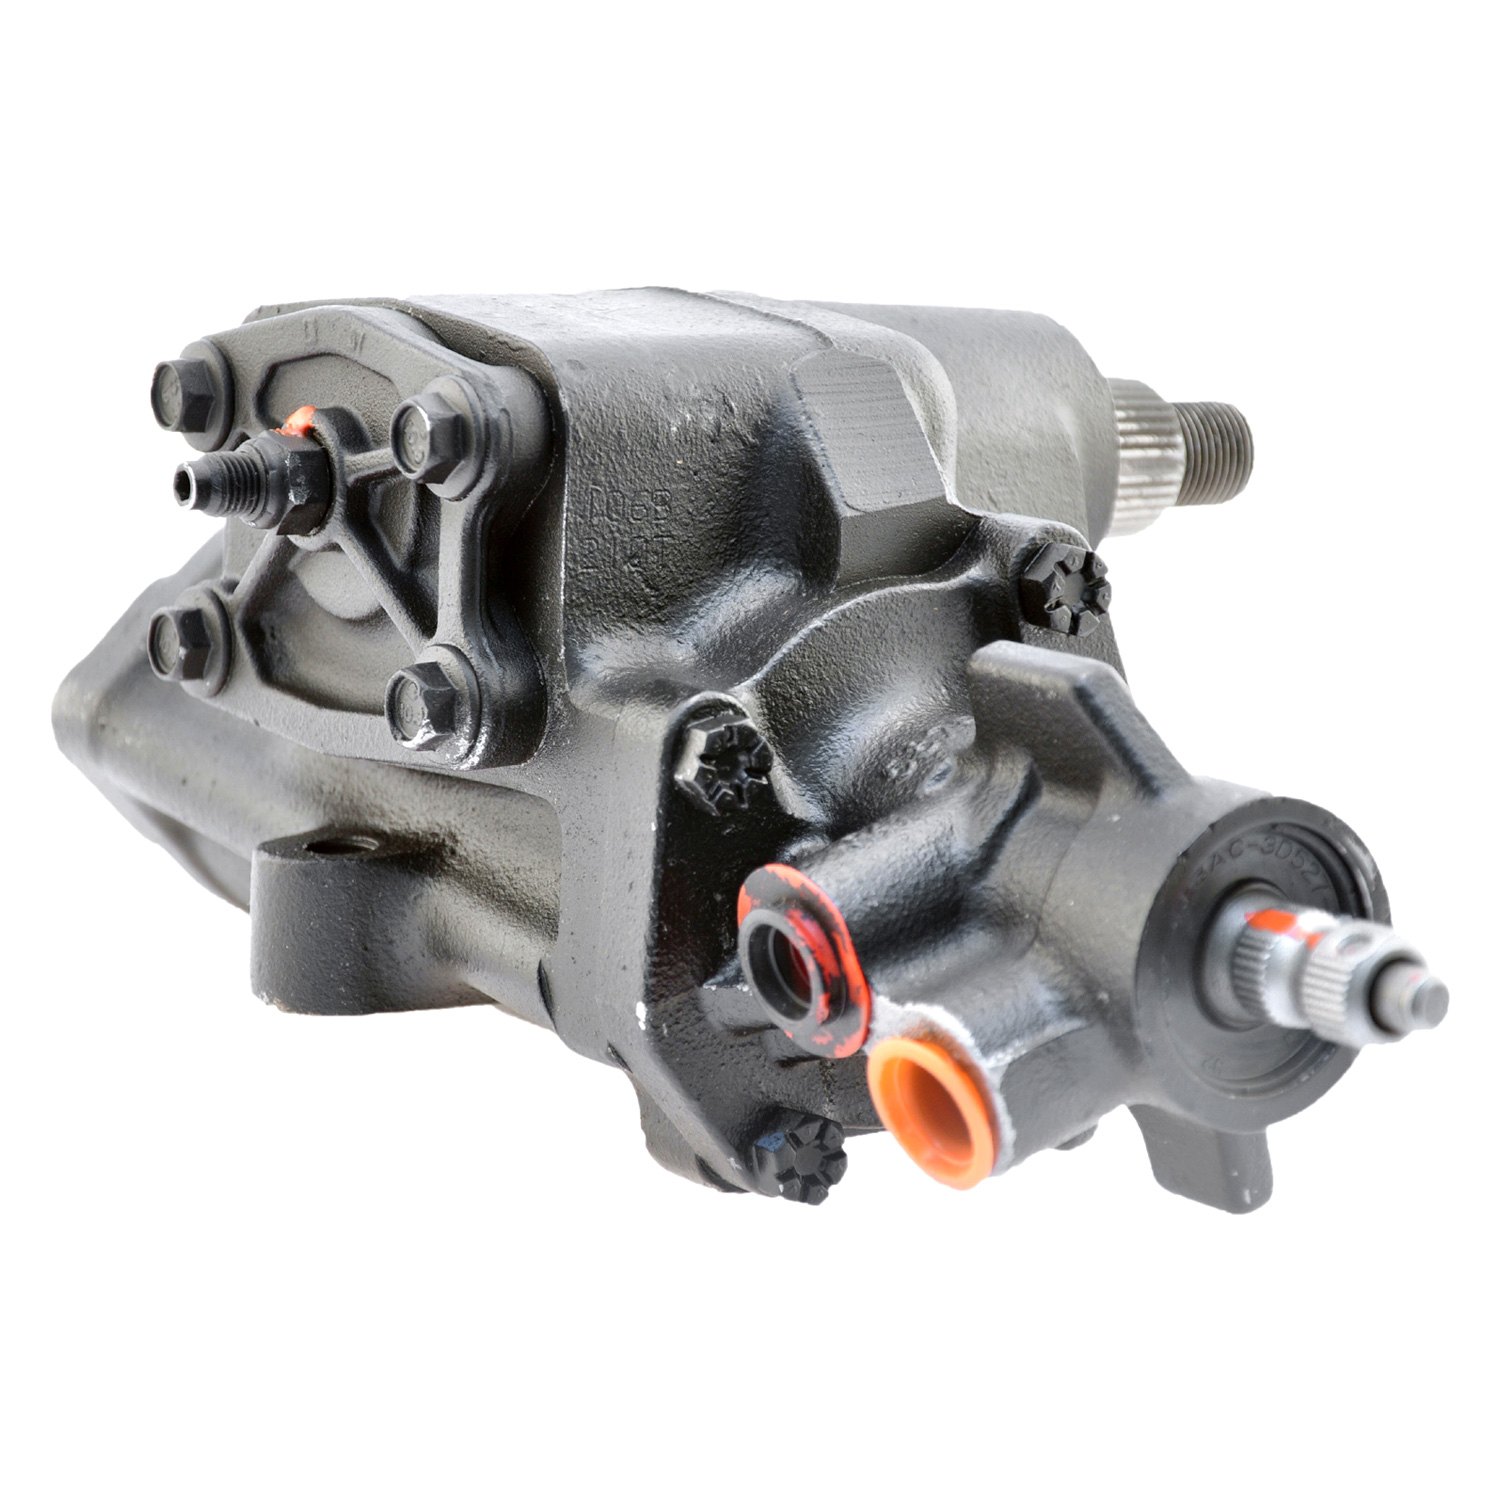 ACDelco® 36G0085 - Professional™ Remanufactured Power Steering Gear Box